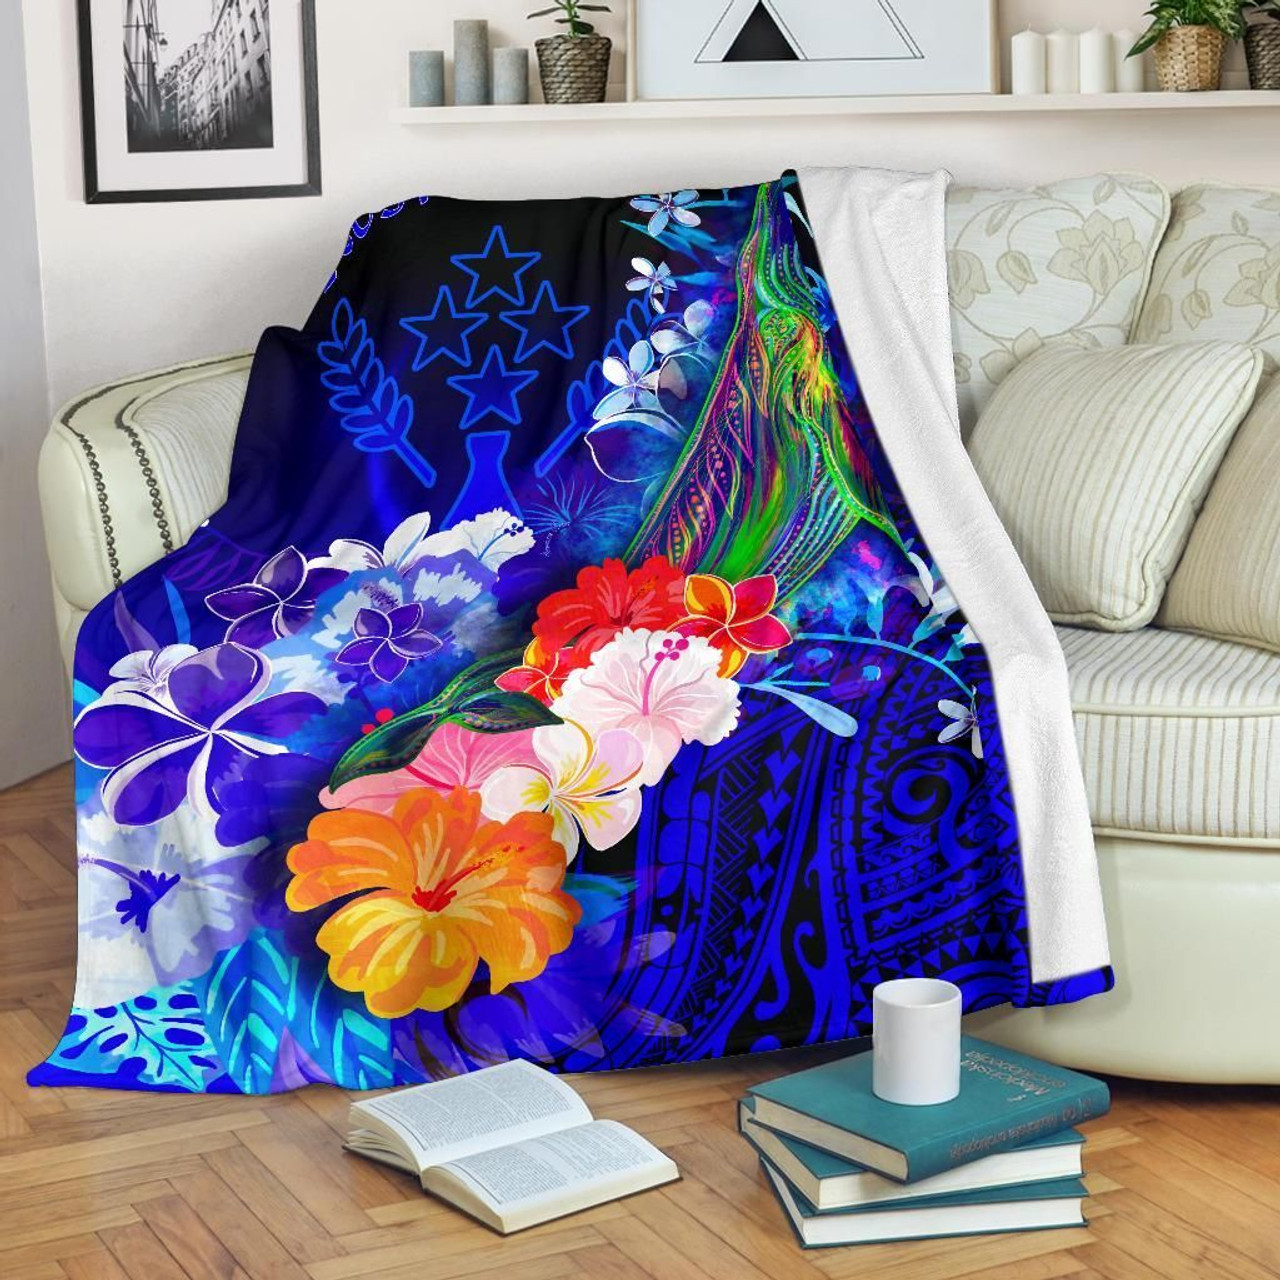 Kosrae Premium Blanket - Humpback Whale with Tropical Flowers (Blue) 1